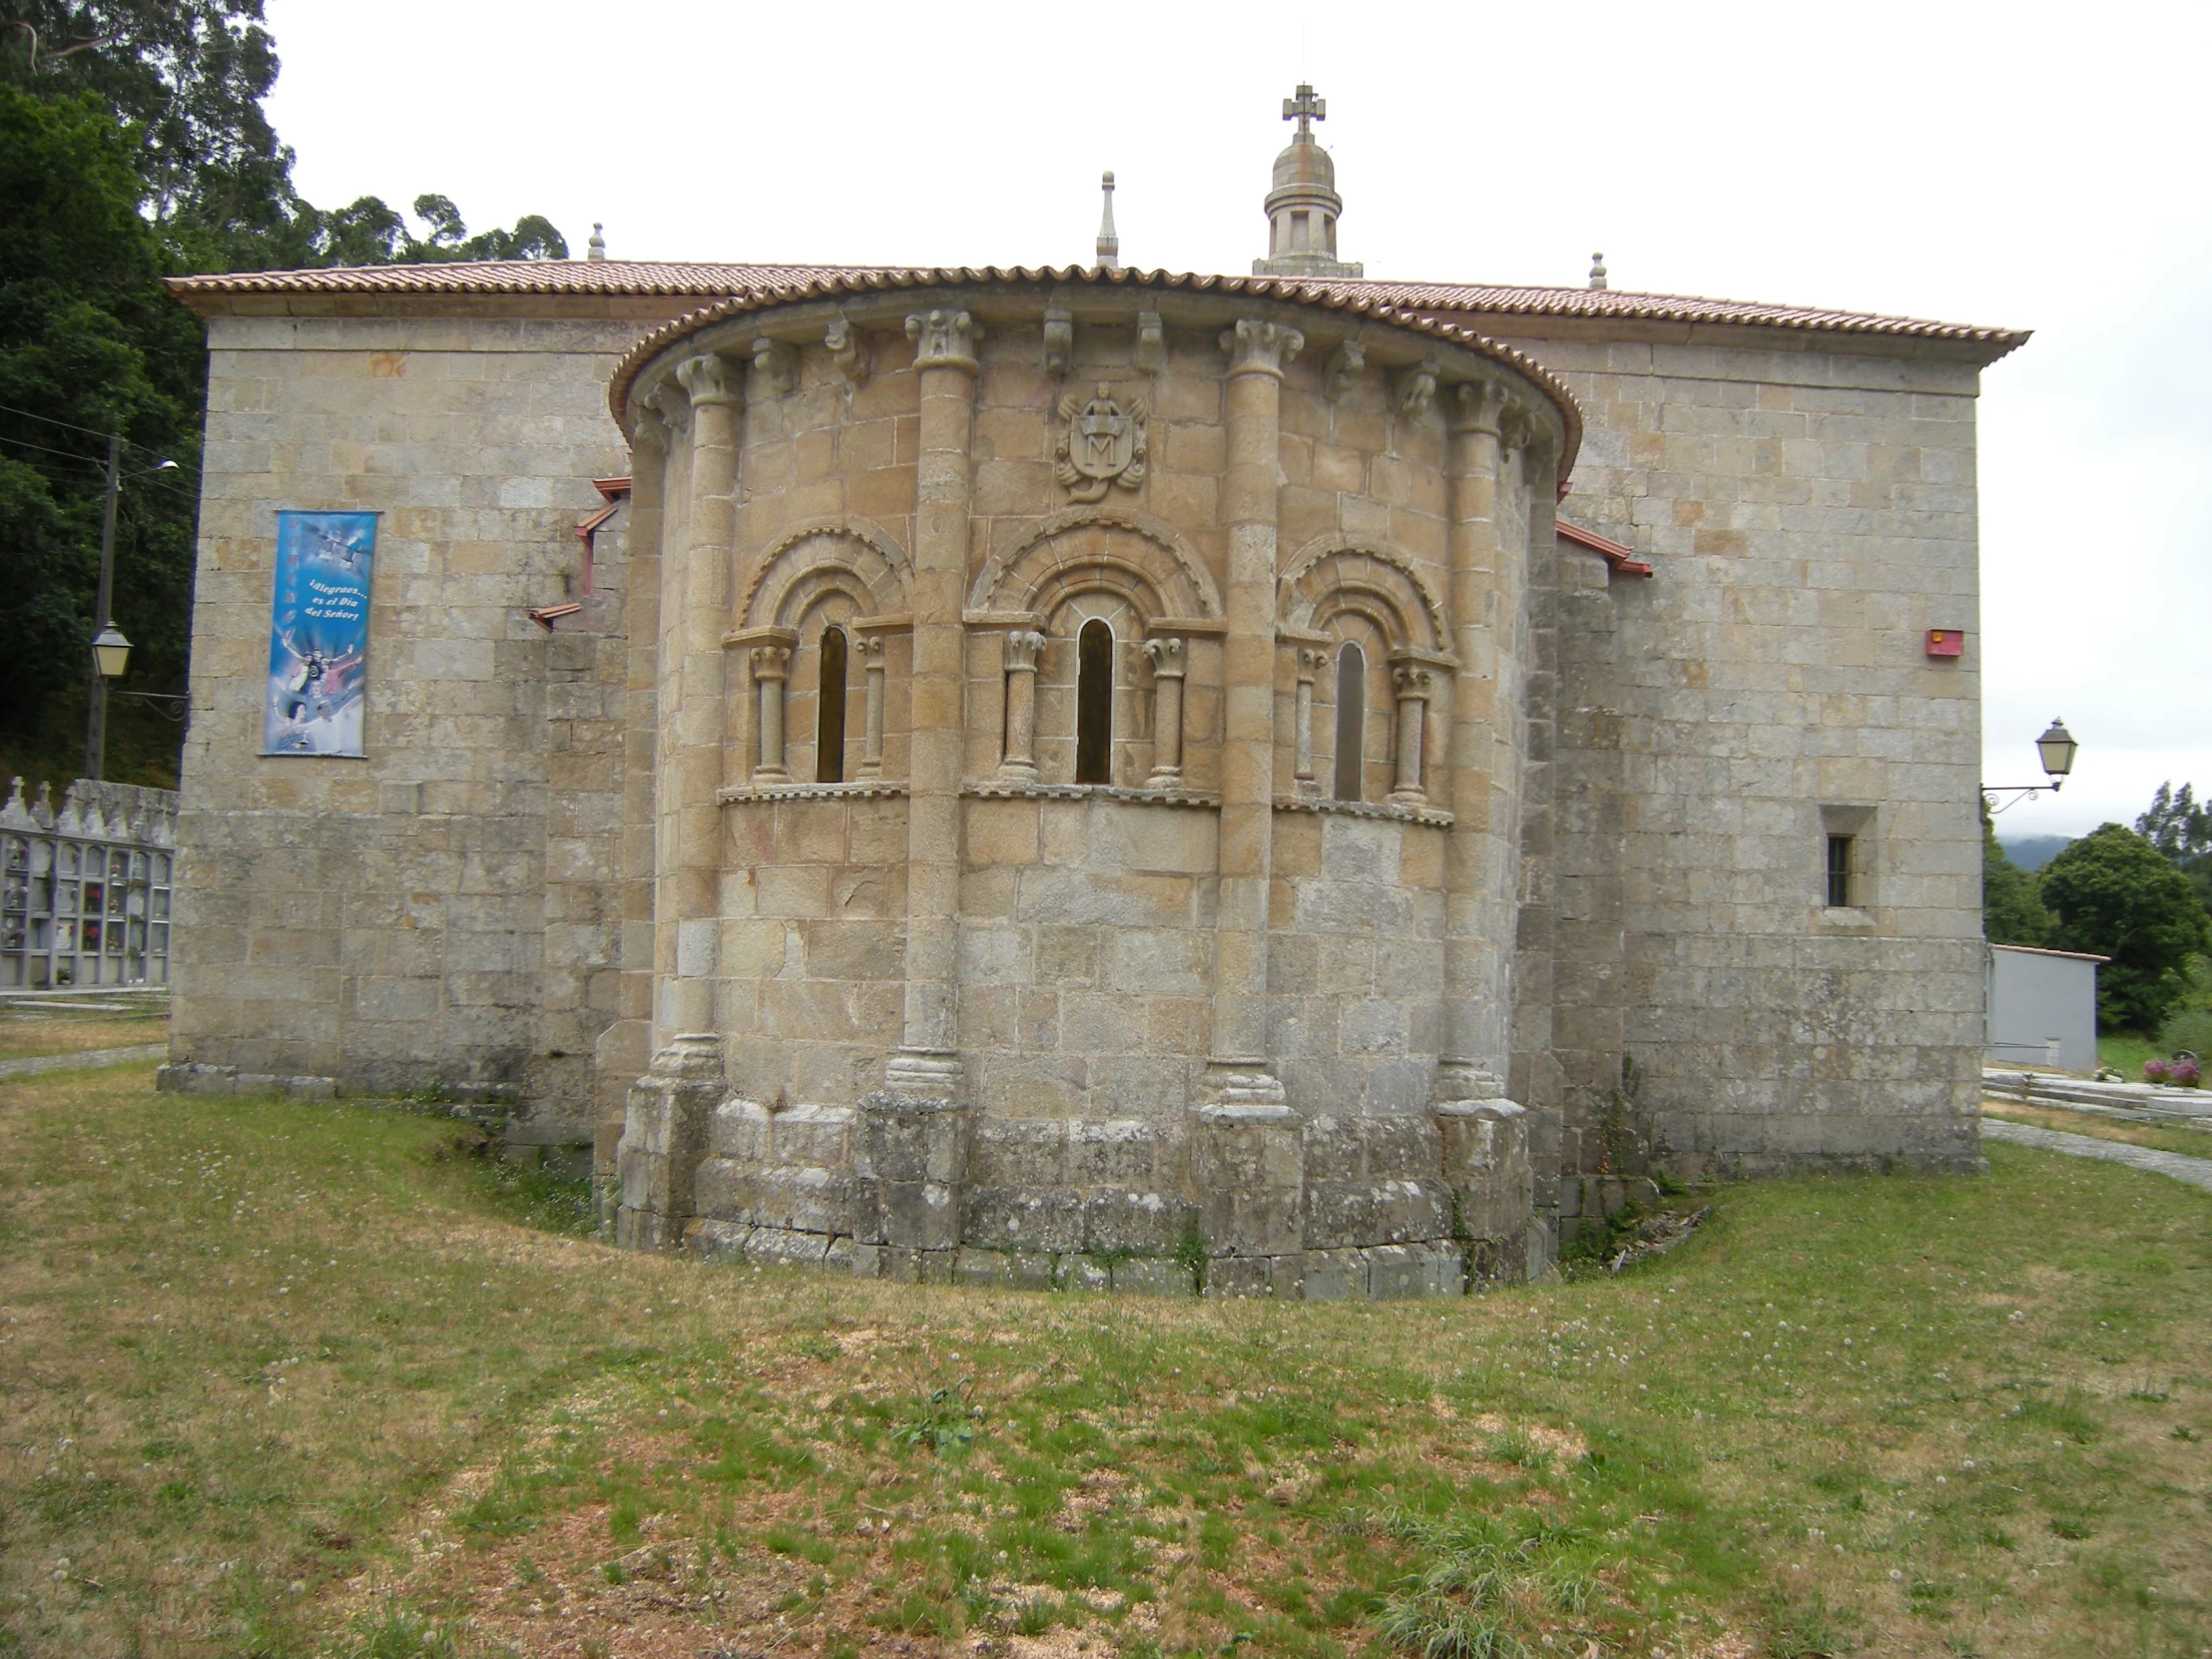 an old church building in a grassy area